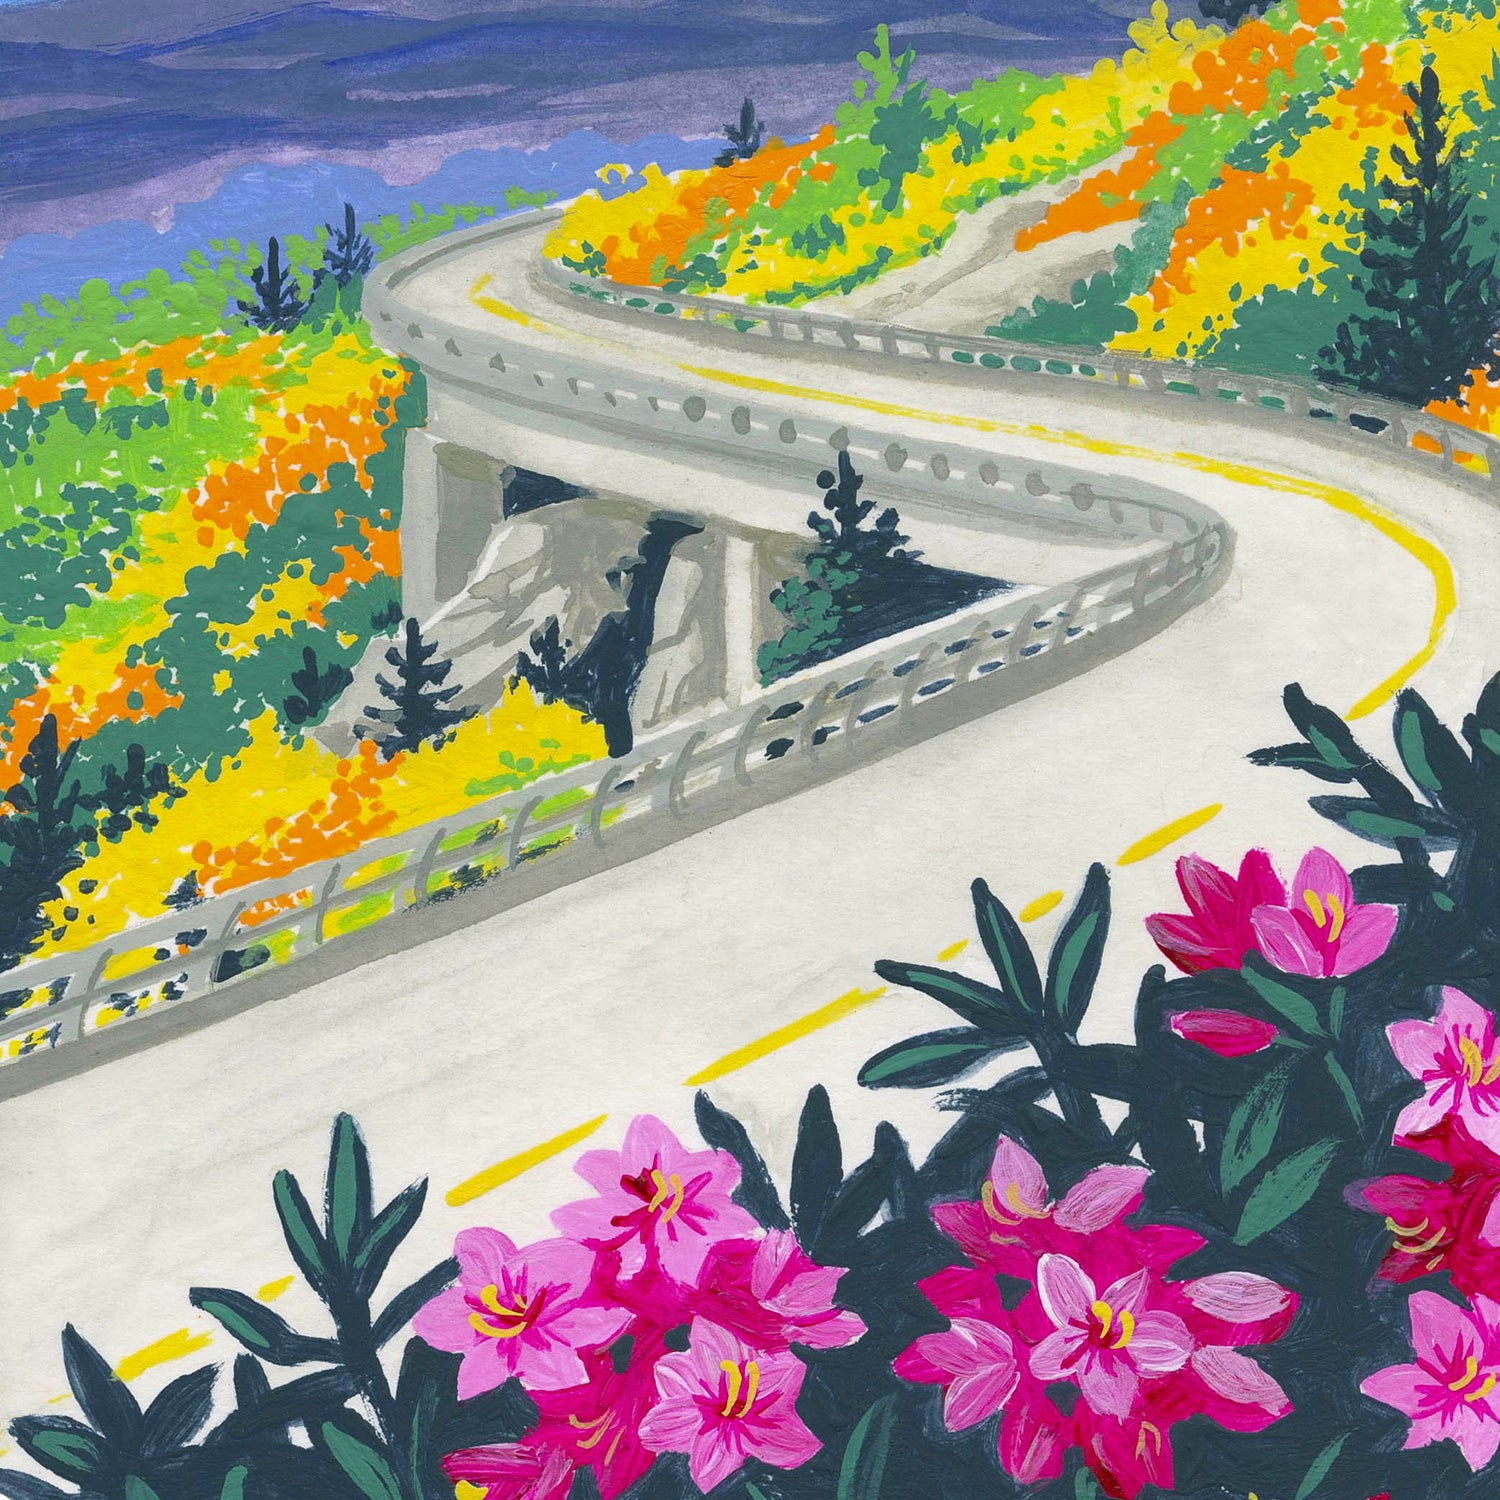 Blue Ridge Parkway National Park art detail with Blue Ridge Mountains , Appalachian Mountains, and rhododendron flowers; trendy illustration by Angela Staehling